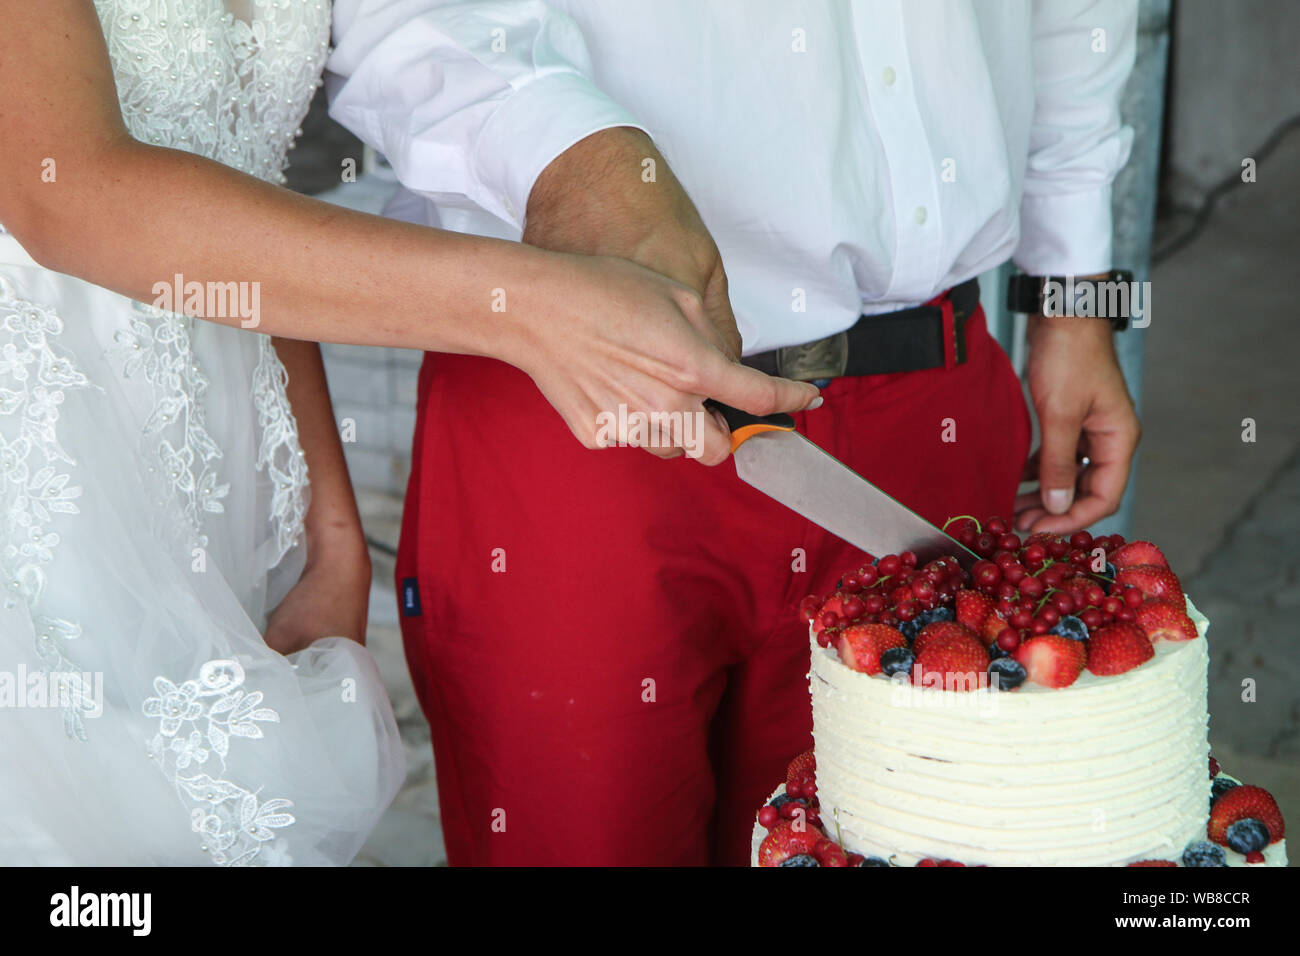 The detail of the hands of the bride and groom during the wedding ceremony. They are cutting together the wedding cake. Stock Photo